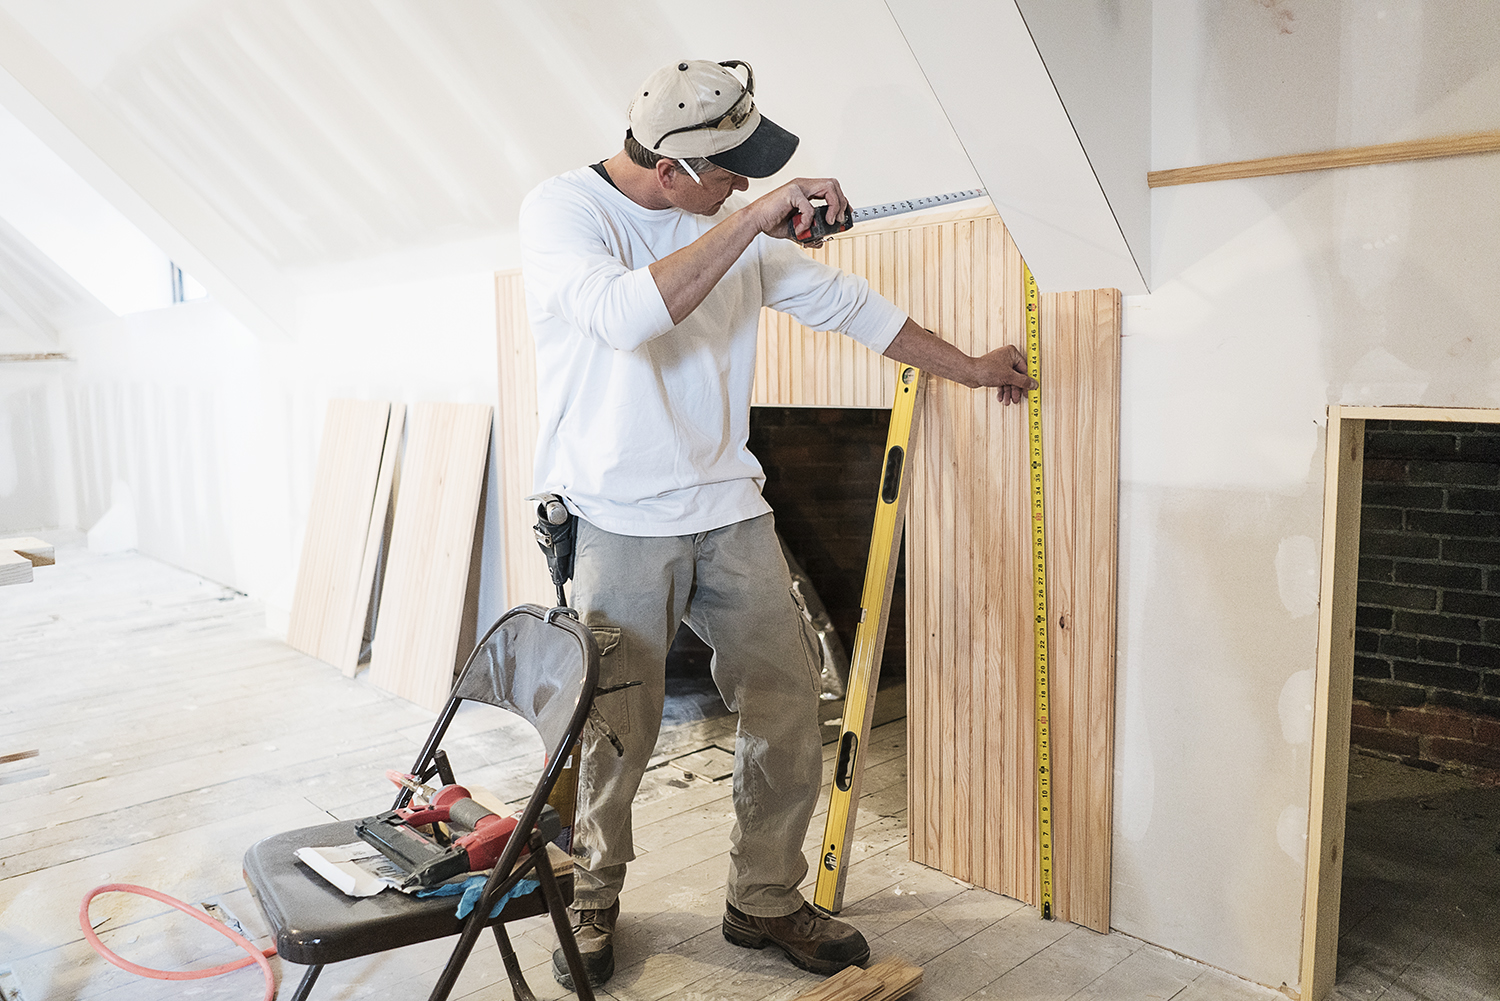 Flint, MI - Tuesday, October 31, 2017: Ensuring his measurements are accurate and perfectly level, carpenter Rob Smith, 43, of Oxford, works on installing bead board on the walls of the third floor in the Whaley Historic House Museum.